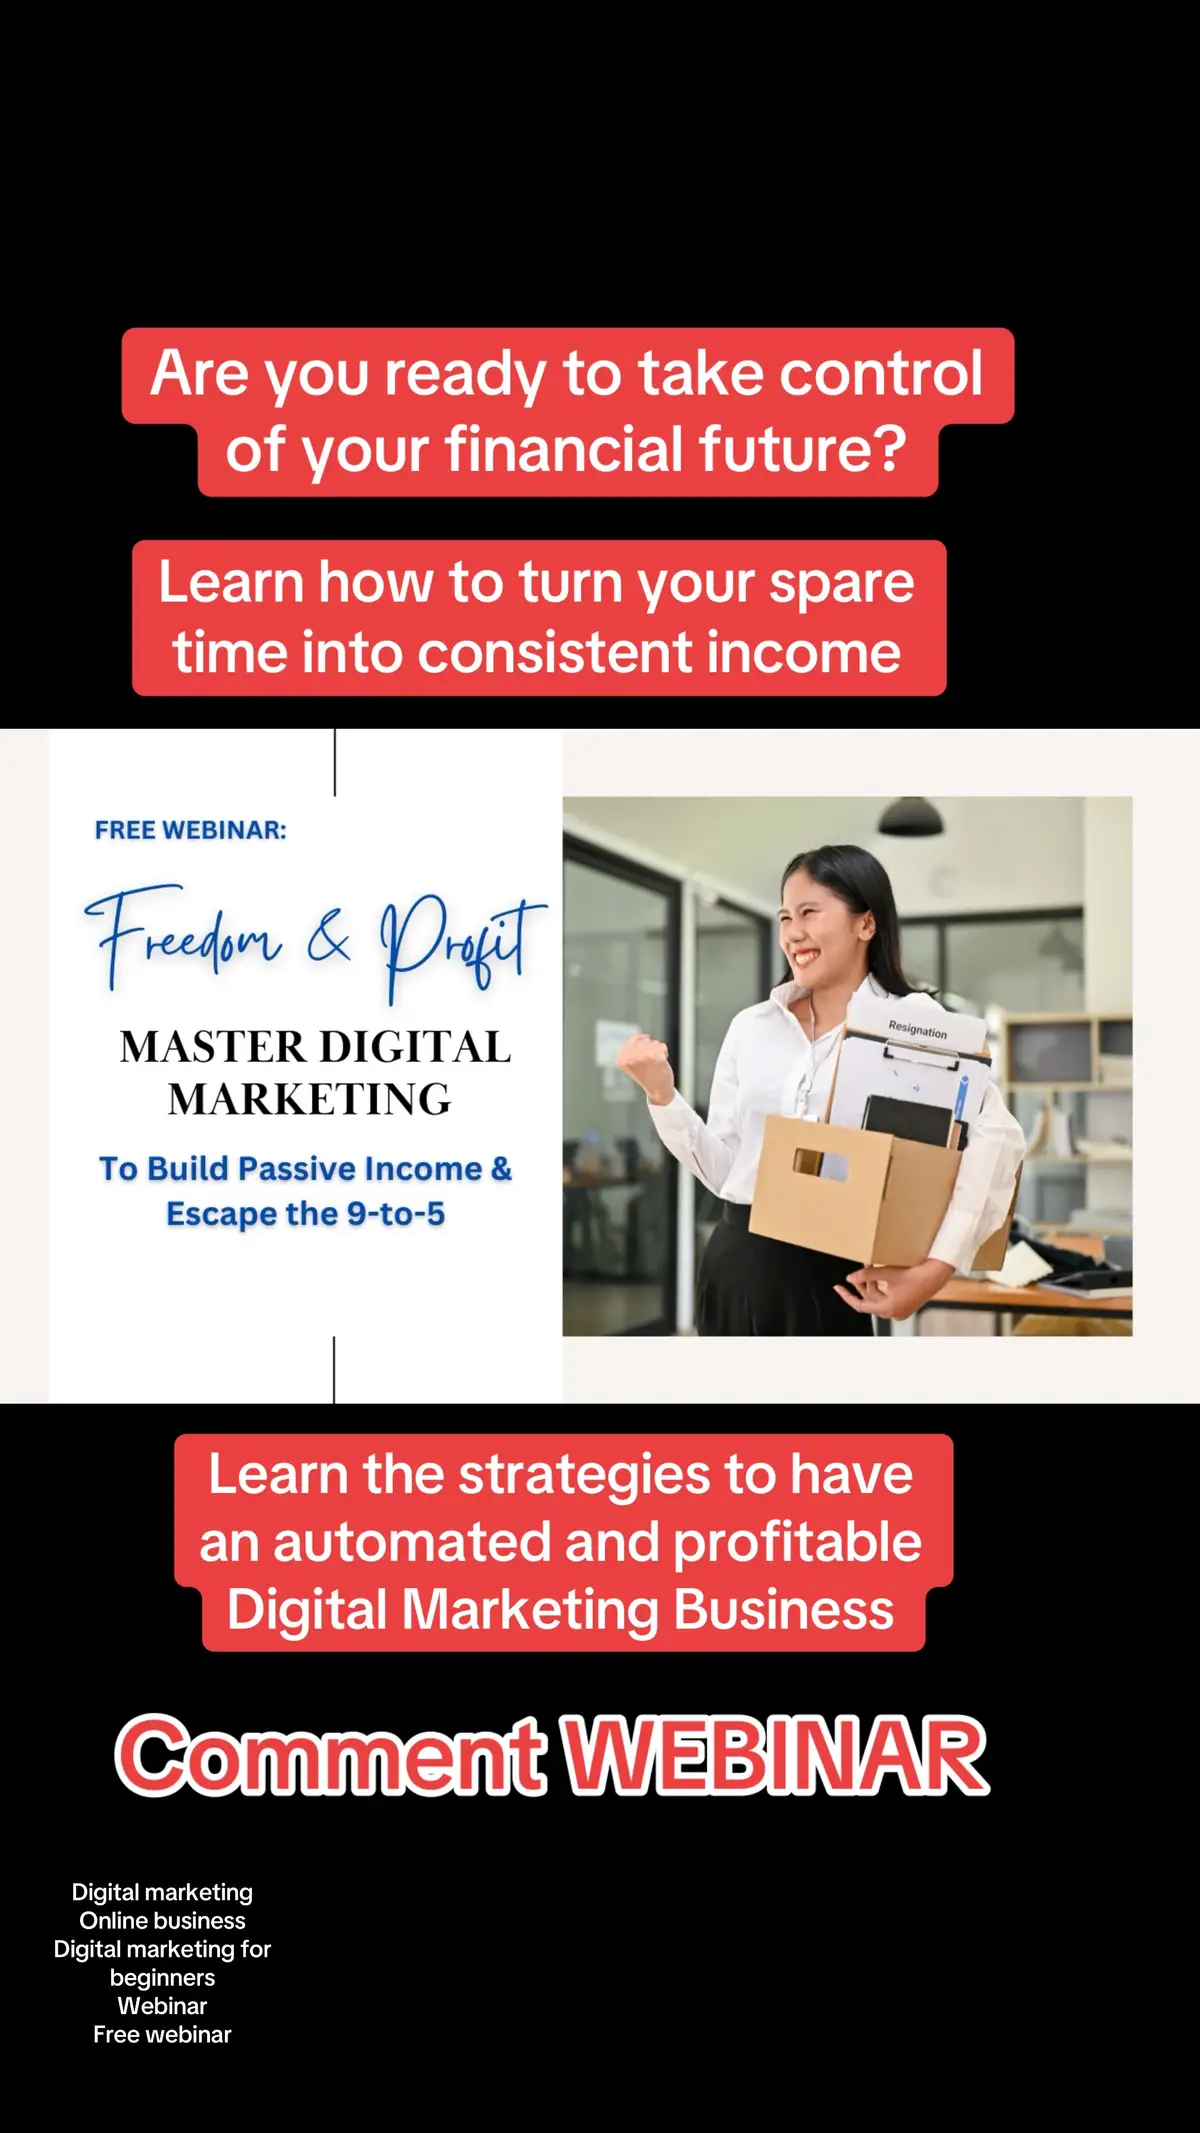 IF you’re ready to take control of your financial furture and learn how you can learn the strategies to create your own automated, profitable online Digital Marketing business.  Comment WEBINAR 